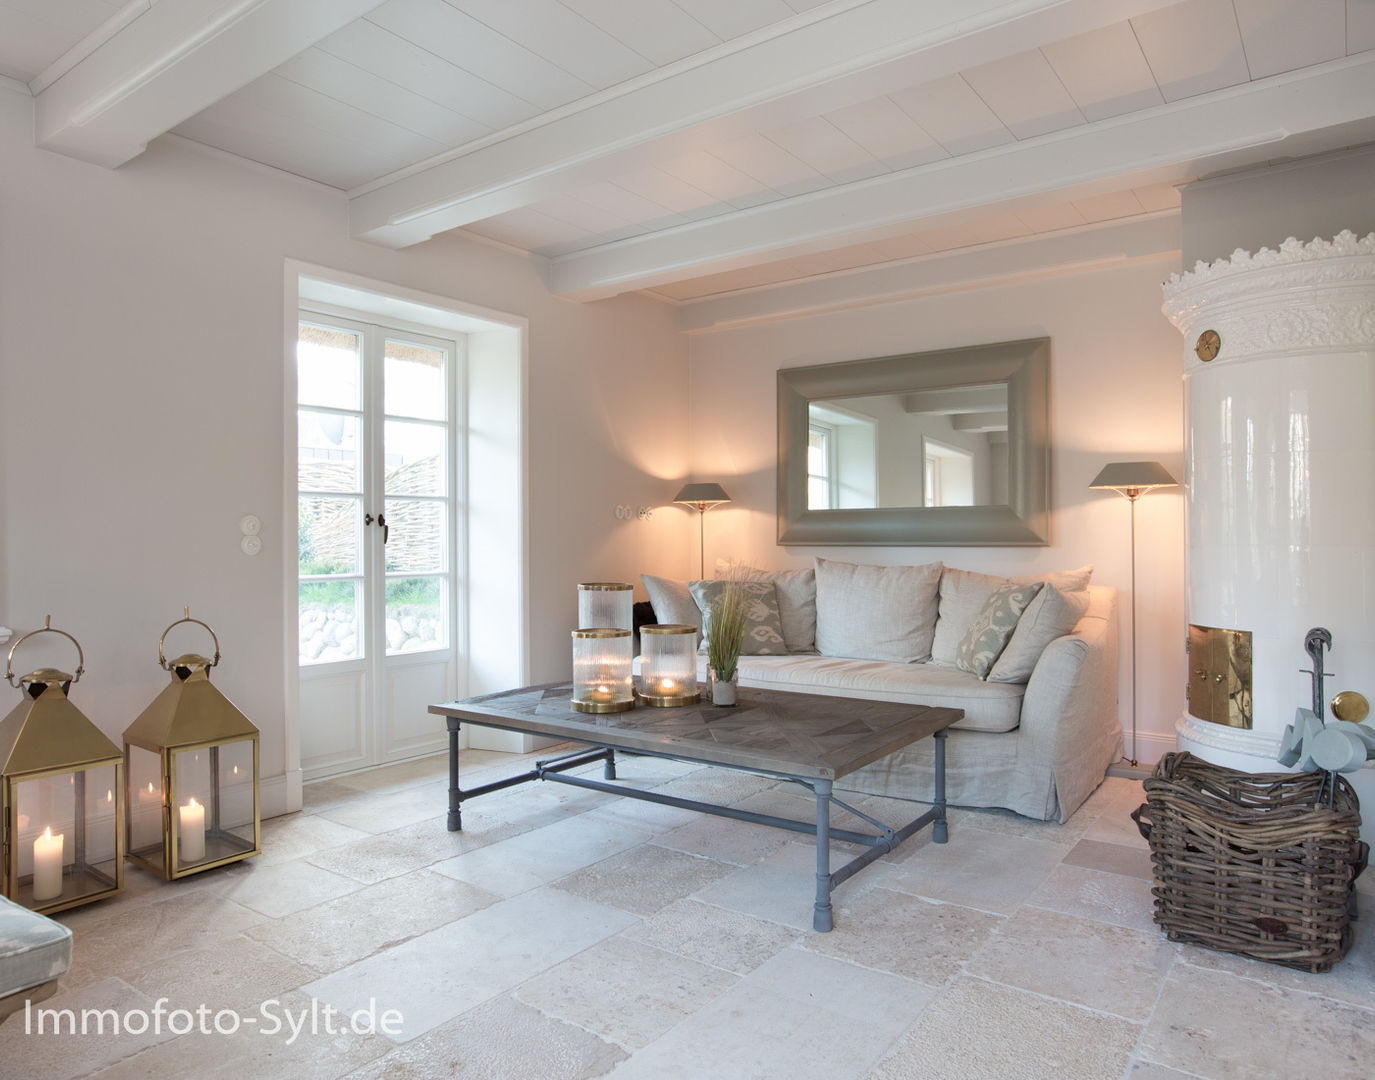 Reetdachhaus in List auf Sylt, Immofoto-Sylt Immofoto-Sylt Country style living room